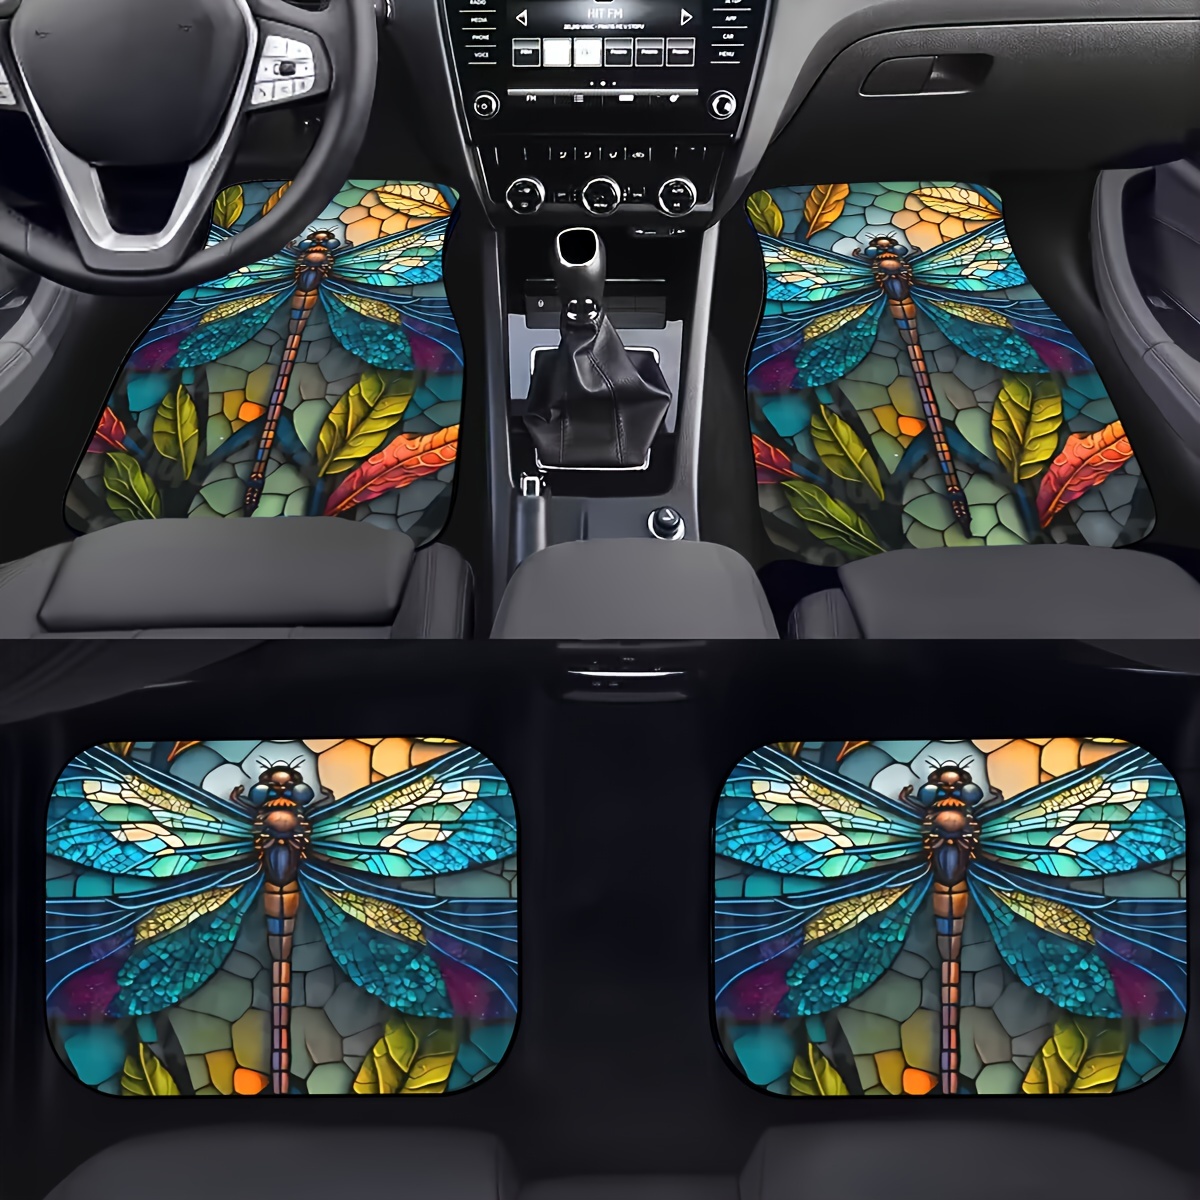 

4pcs/set Dragonfly Pattern Car Floor Mats - Colorful And Cool Design - Universal Fit - Car Interior Accessories